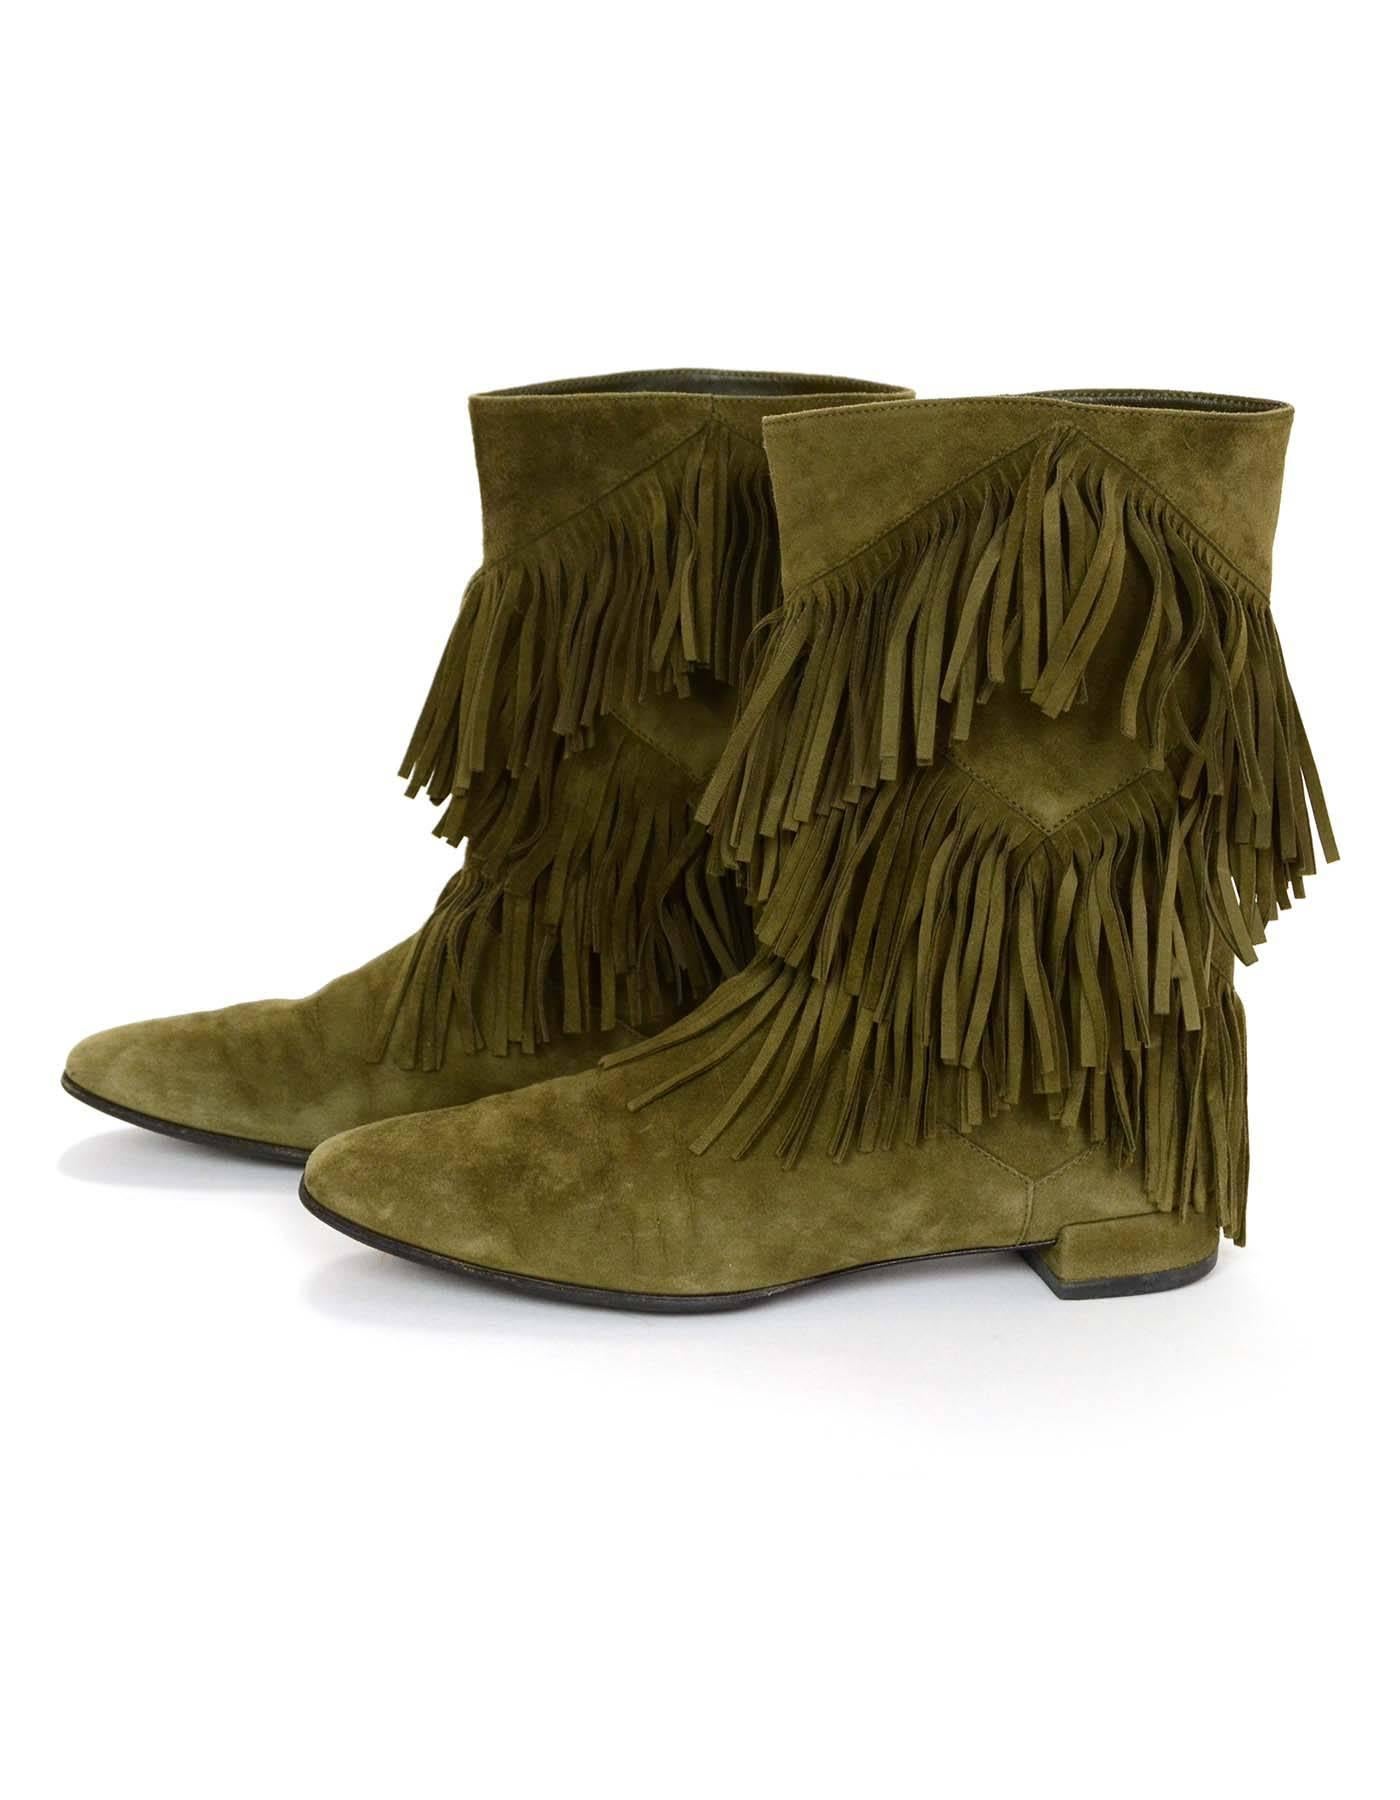 Roger Vivier Olive Suede Prismick Fringe Boots Sz 36.5

Made In: Italy
Color: Olive green
Materials: Suede
Closure/Opening: Pull on
Sole Stamp: RV Made in Italy women's size 36.5
Overall Condition: Excellent pre-owned condition with the exception of